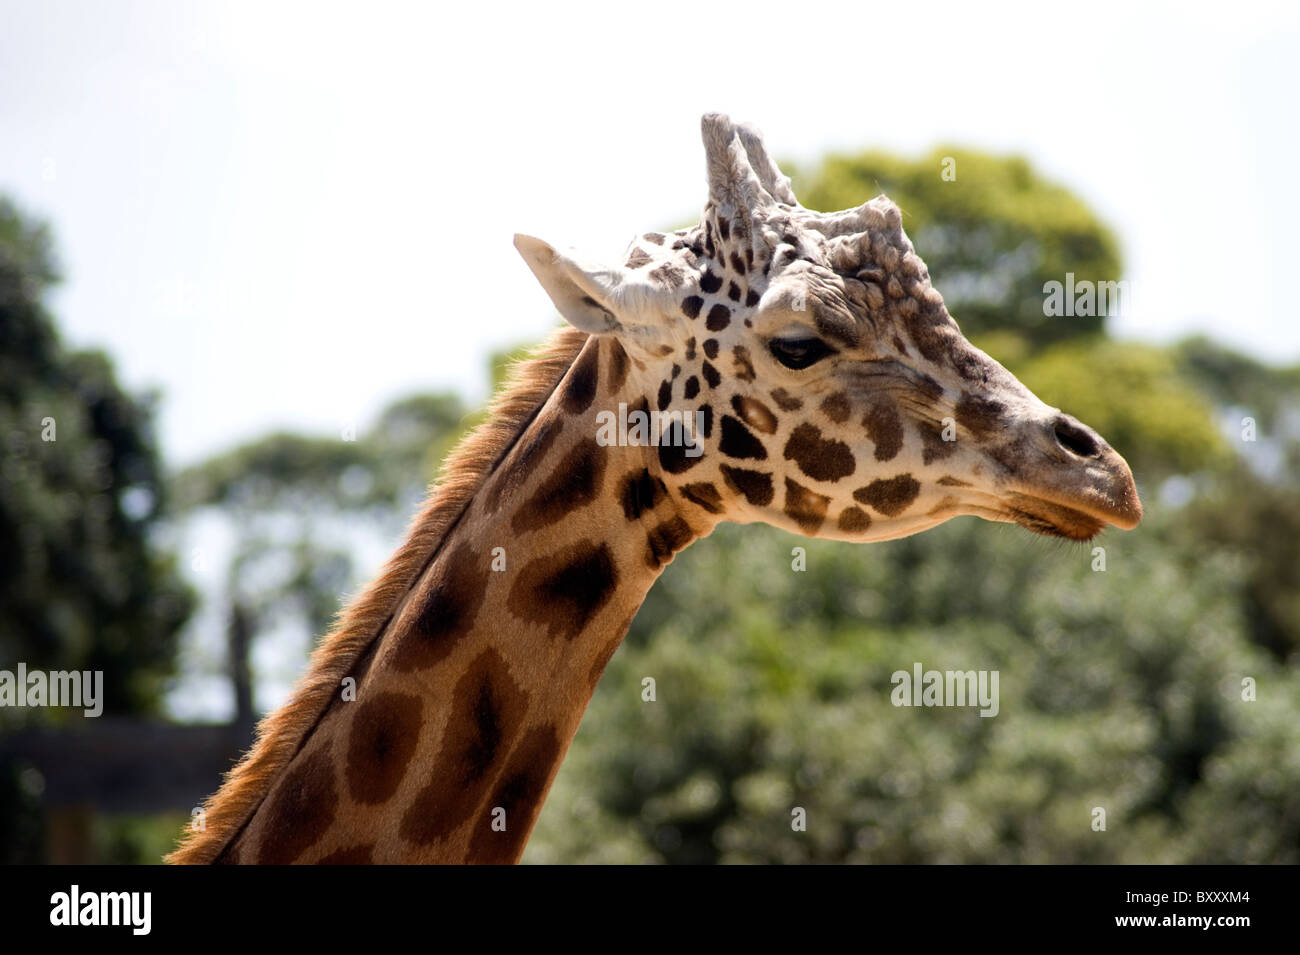 Giraffe head and neck at Auckland zoo Stock Photo